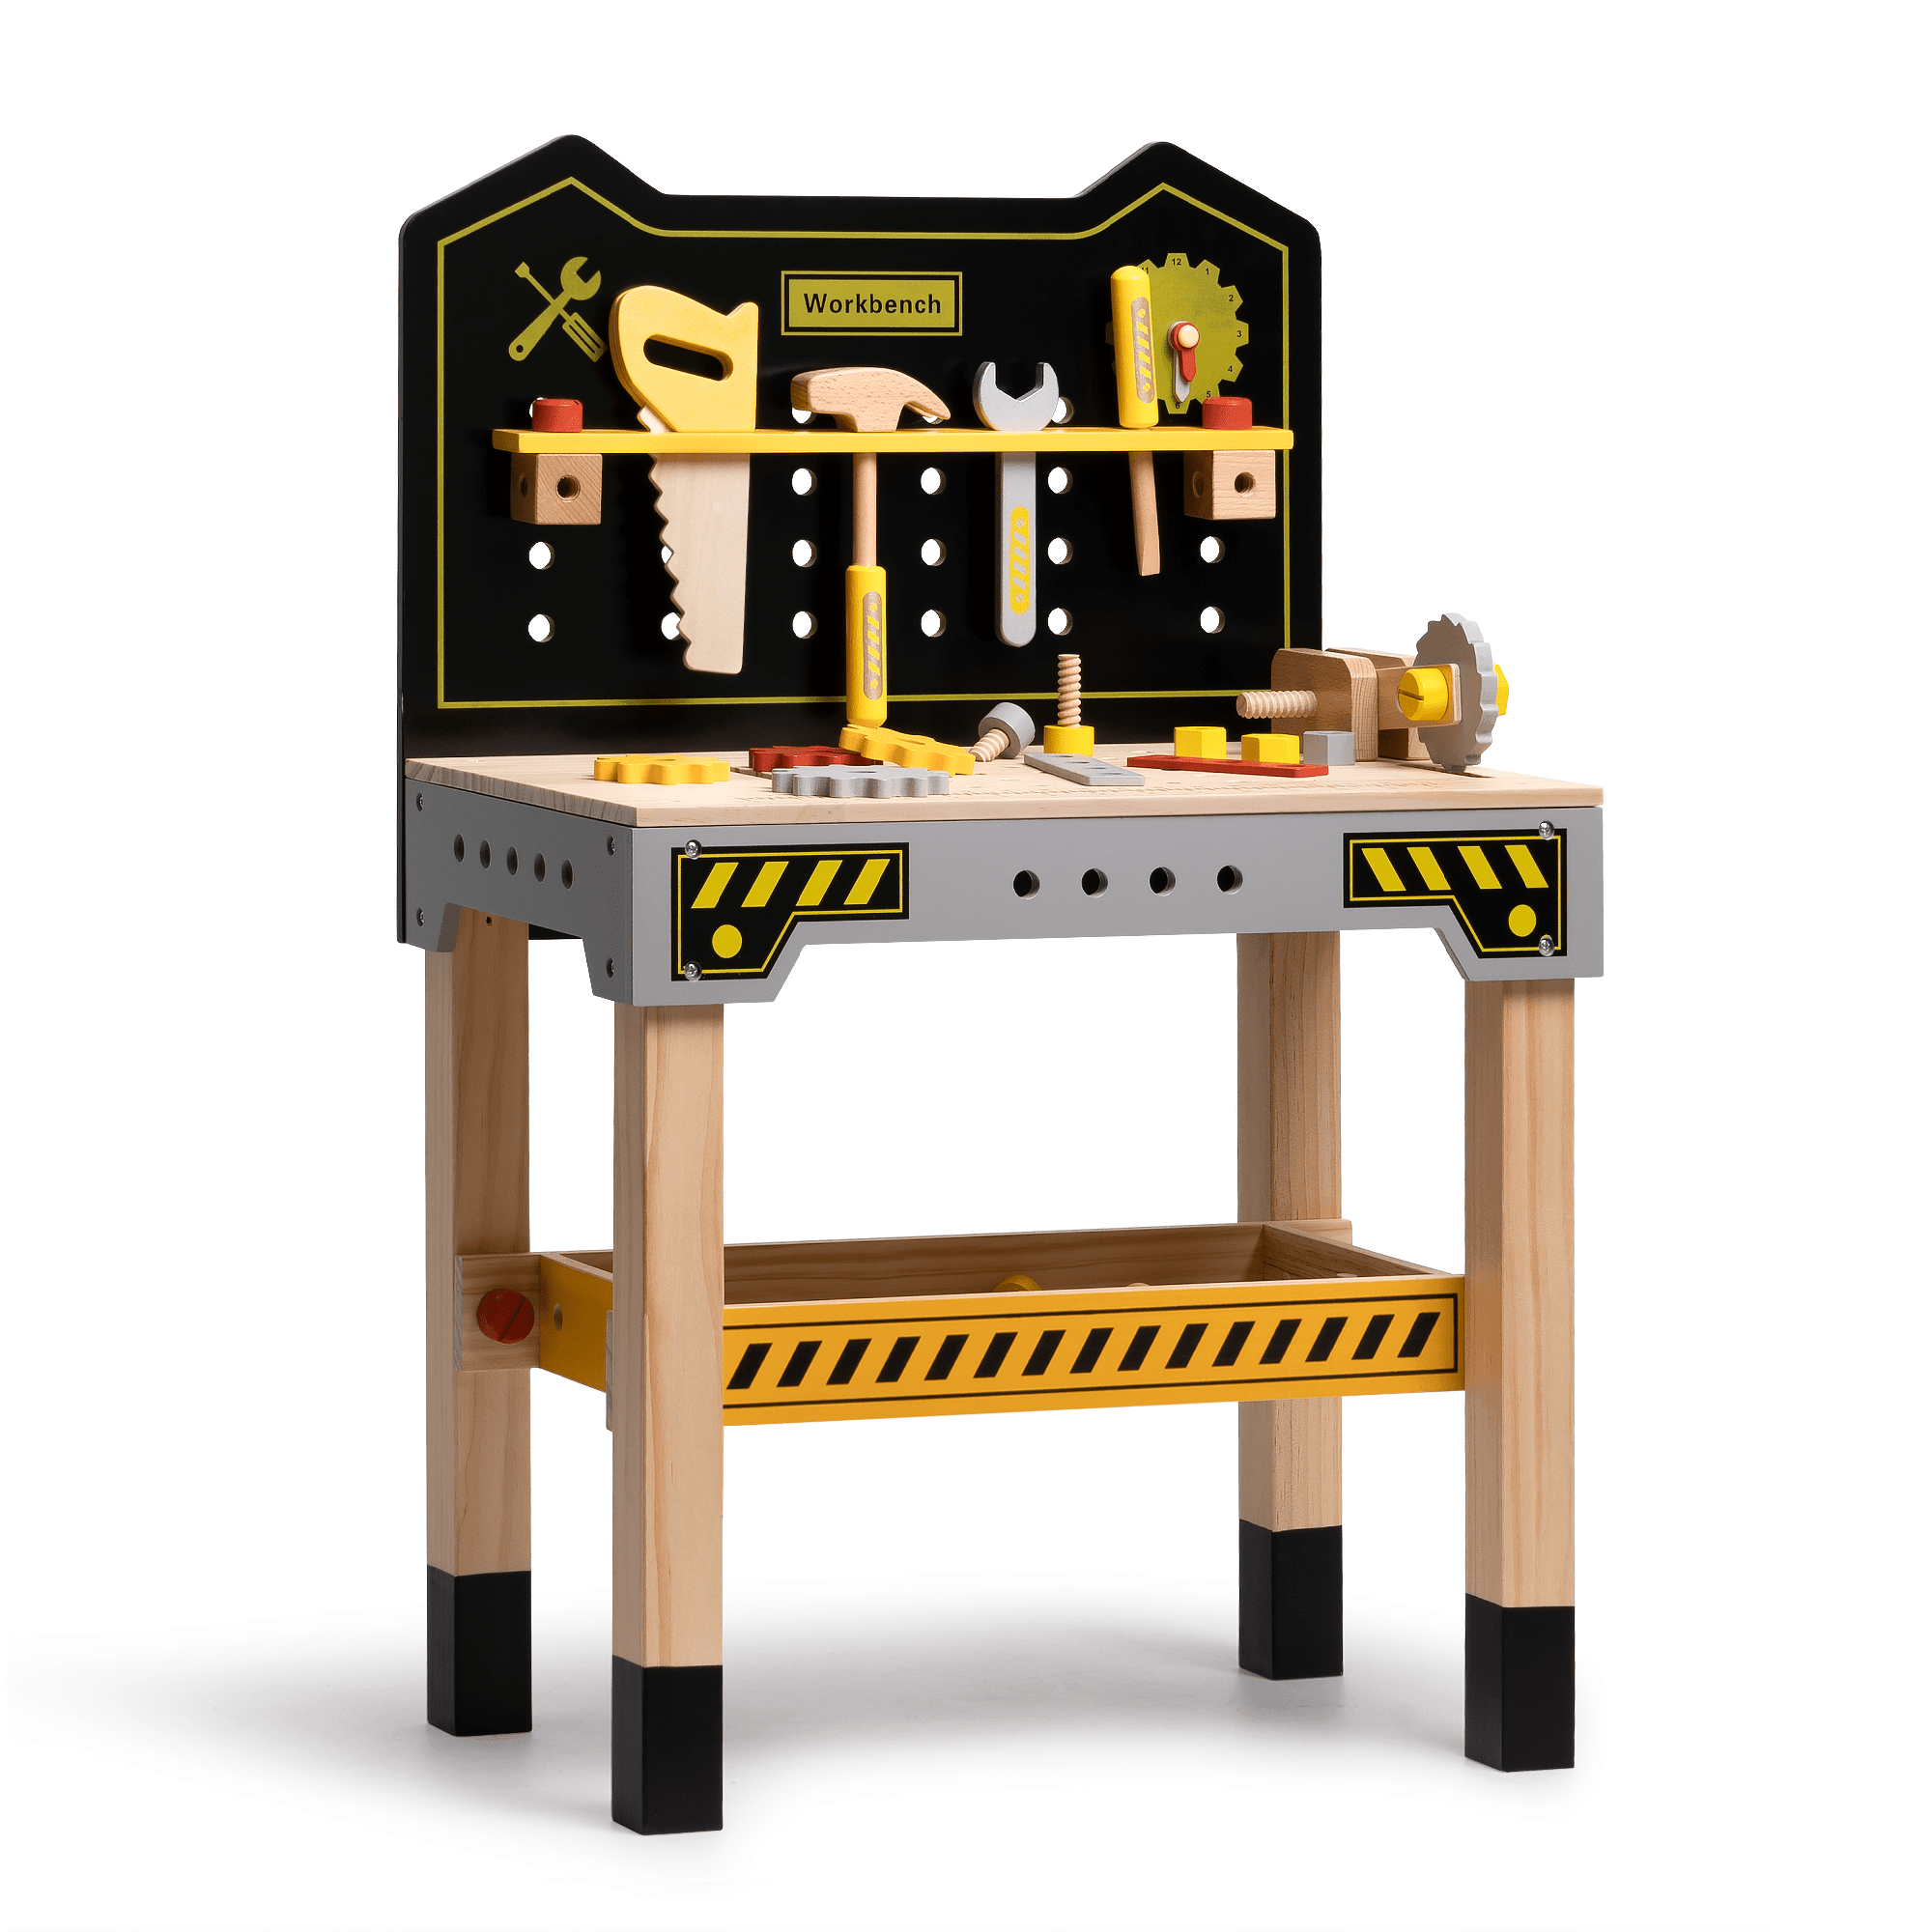 Shop Classic Wooden Workbench for Kids, Great Gift for Children for Christmas,Party,Birthday Mademoiselle Home Decor